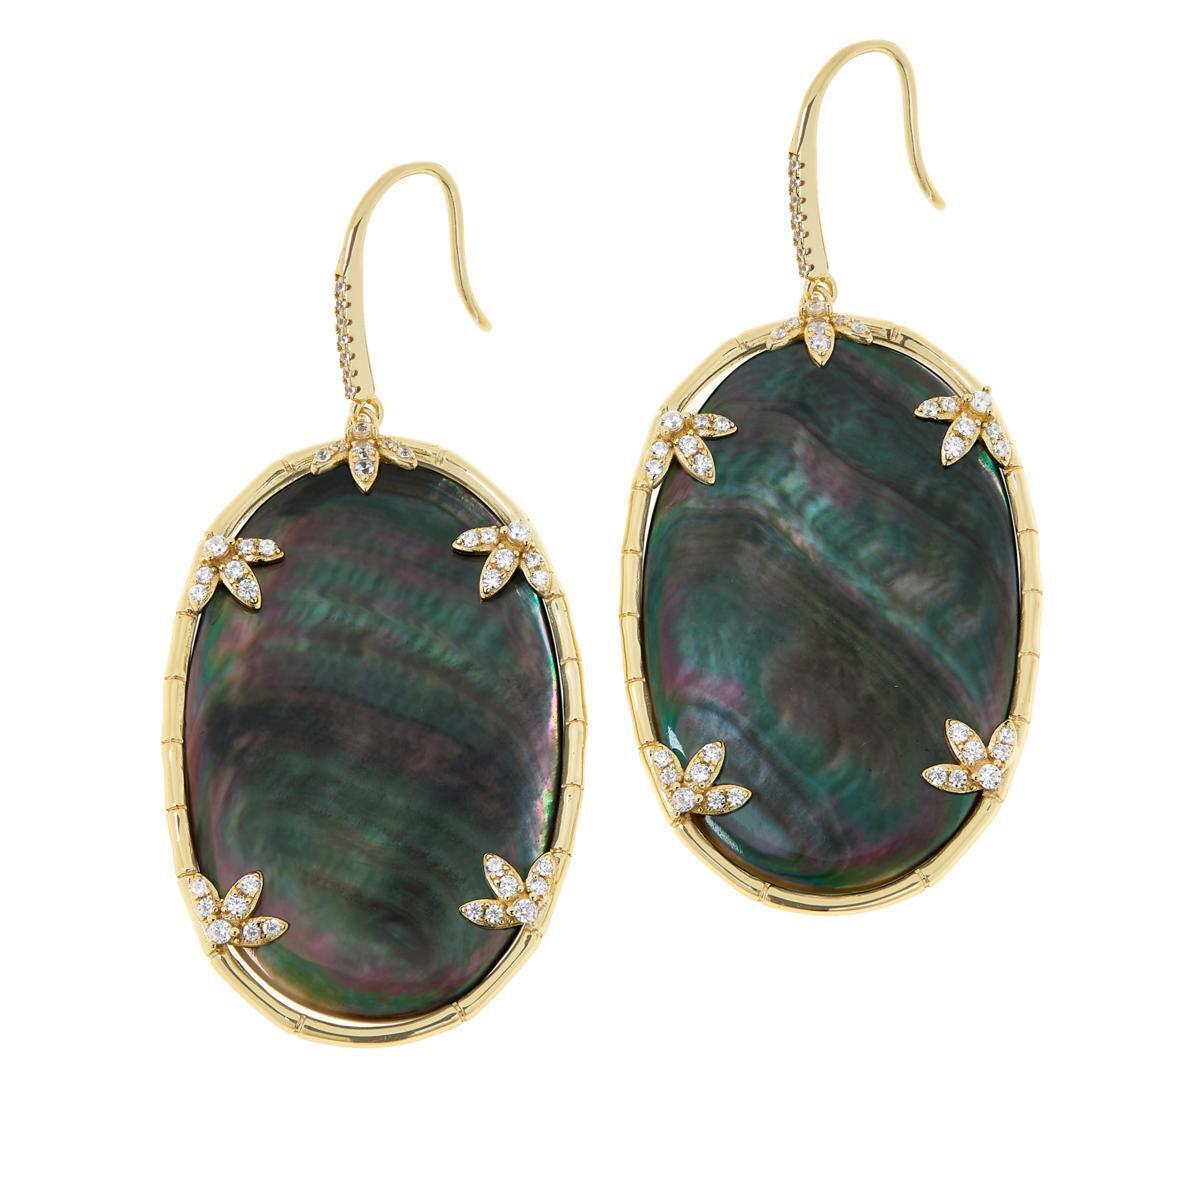 Cristina Sabatini GoldTone Il Fiore Mother-of-Pearl and CZ Earrings